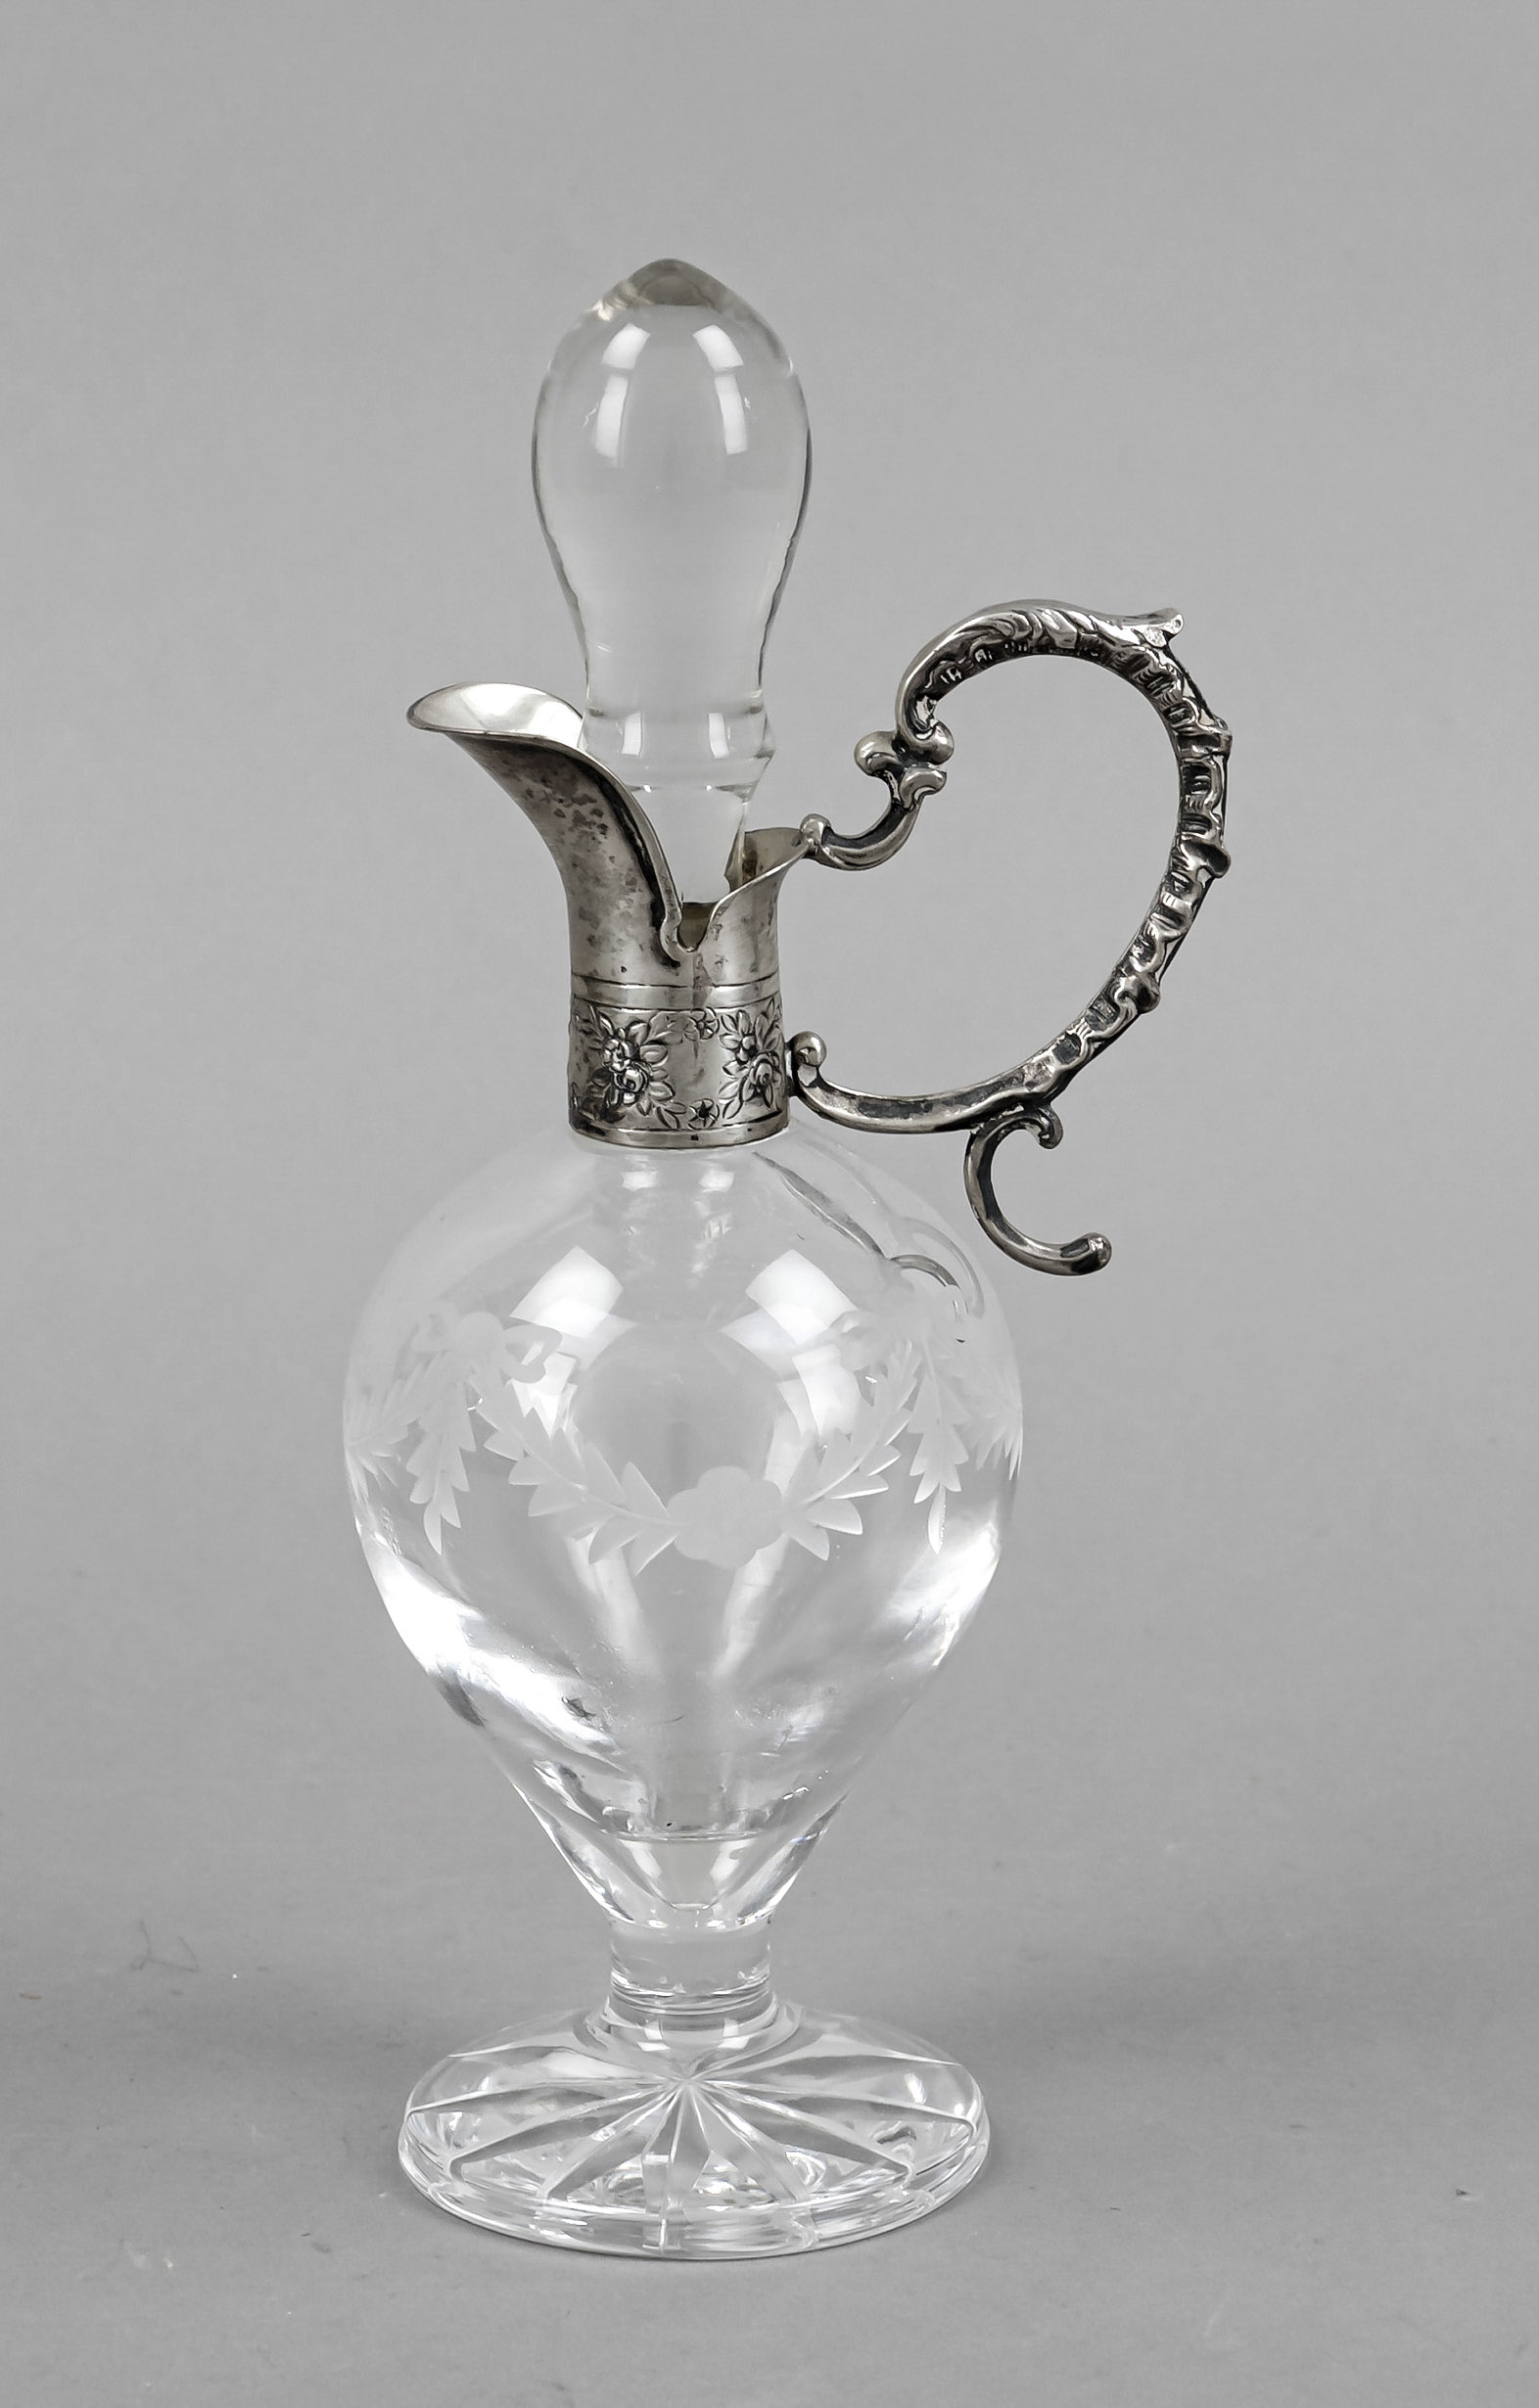 A small carafe with silver mount, German, 1st half 20th century, silver 800/000, neck and handle